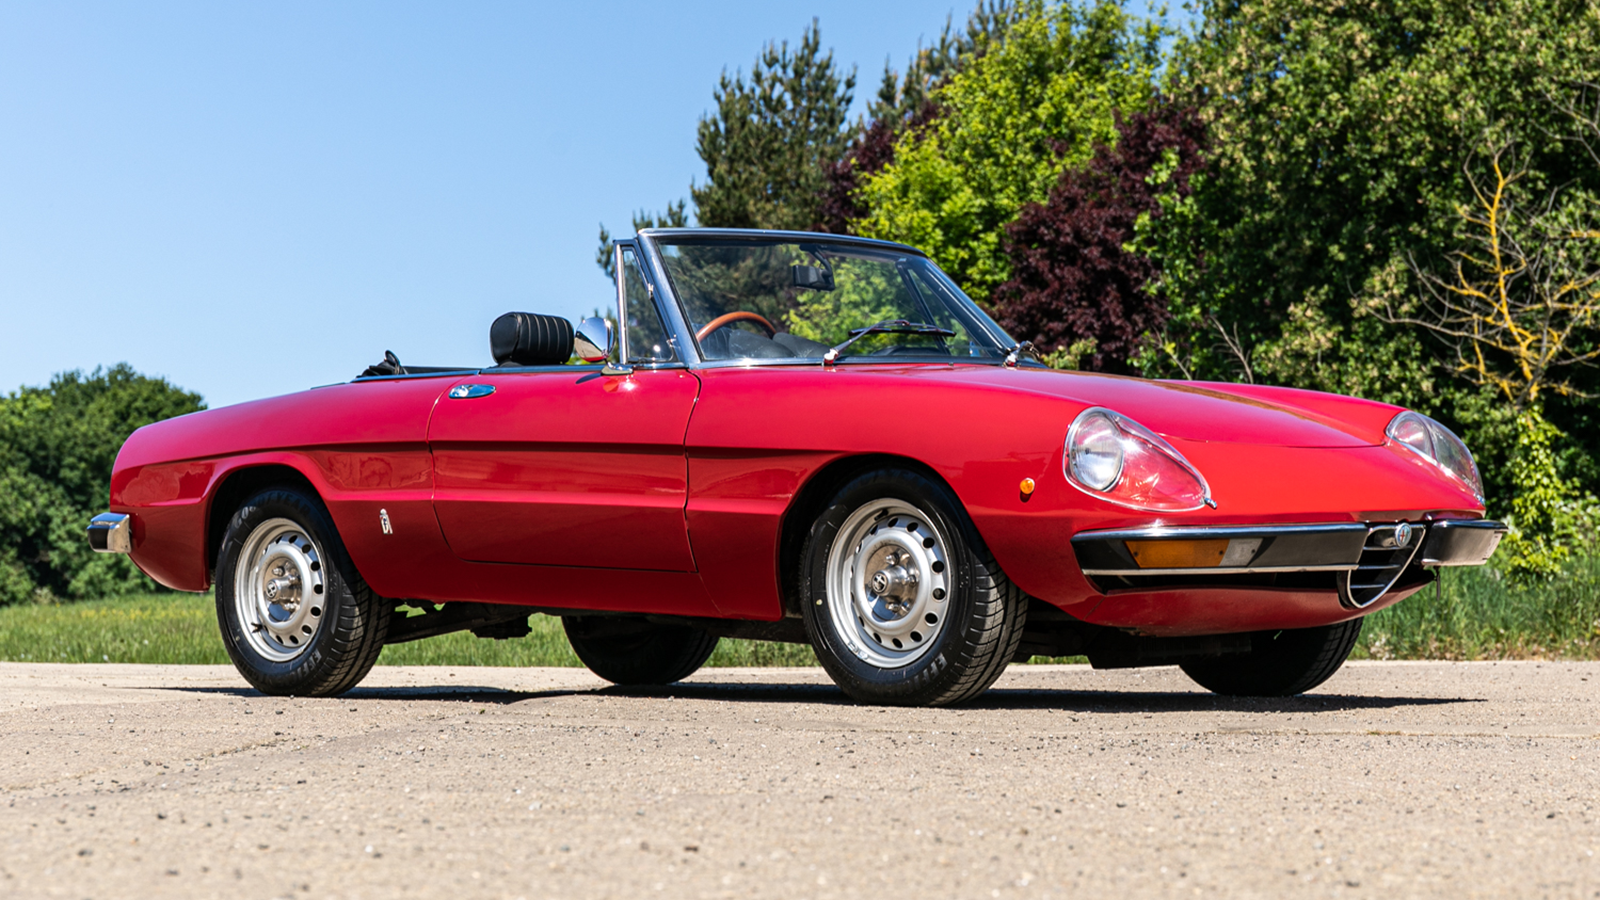 22 £20k classic cars for sale now to get you set for summer 